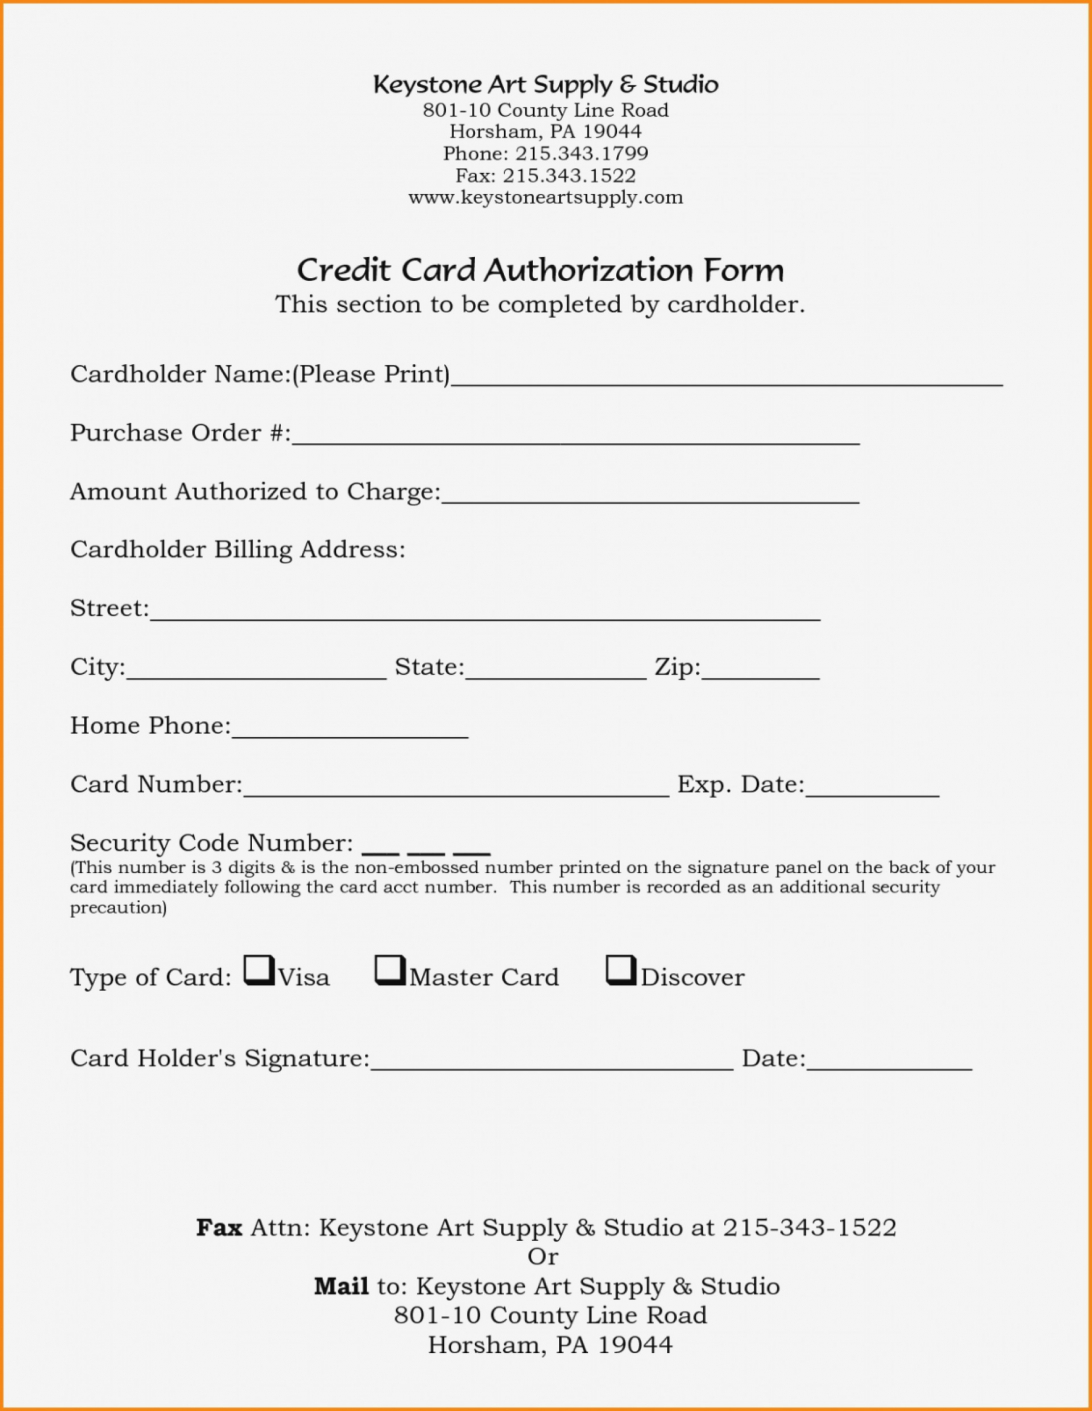 Credit Card Authorization Form Template 41 Jet Airways Uk With Credit Card Authorization Form Template Word